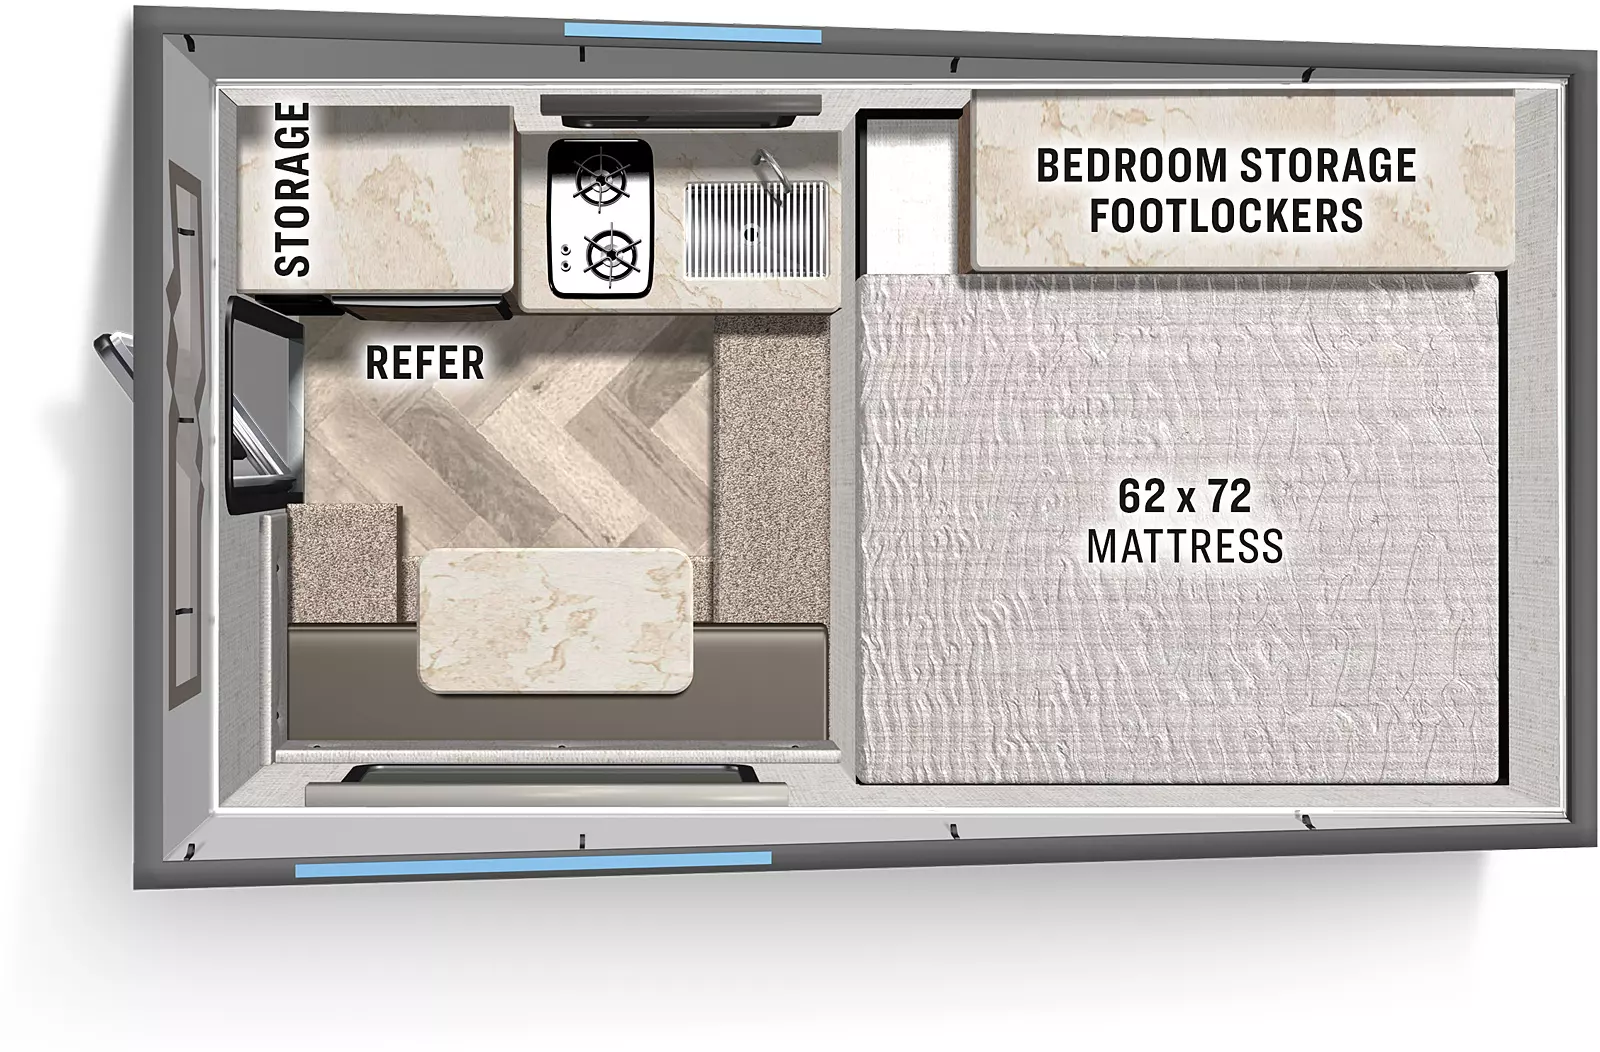 The EB-1 has no slide outs. Interior layout from front to back includes a 62x72 Mattress and bedroom storage footlocker; step down from front; camp side with seating with table; off-camp side sink, cooktop, refrigerator and storage. Rear entry door.